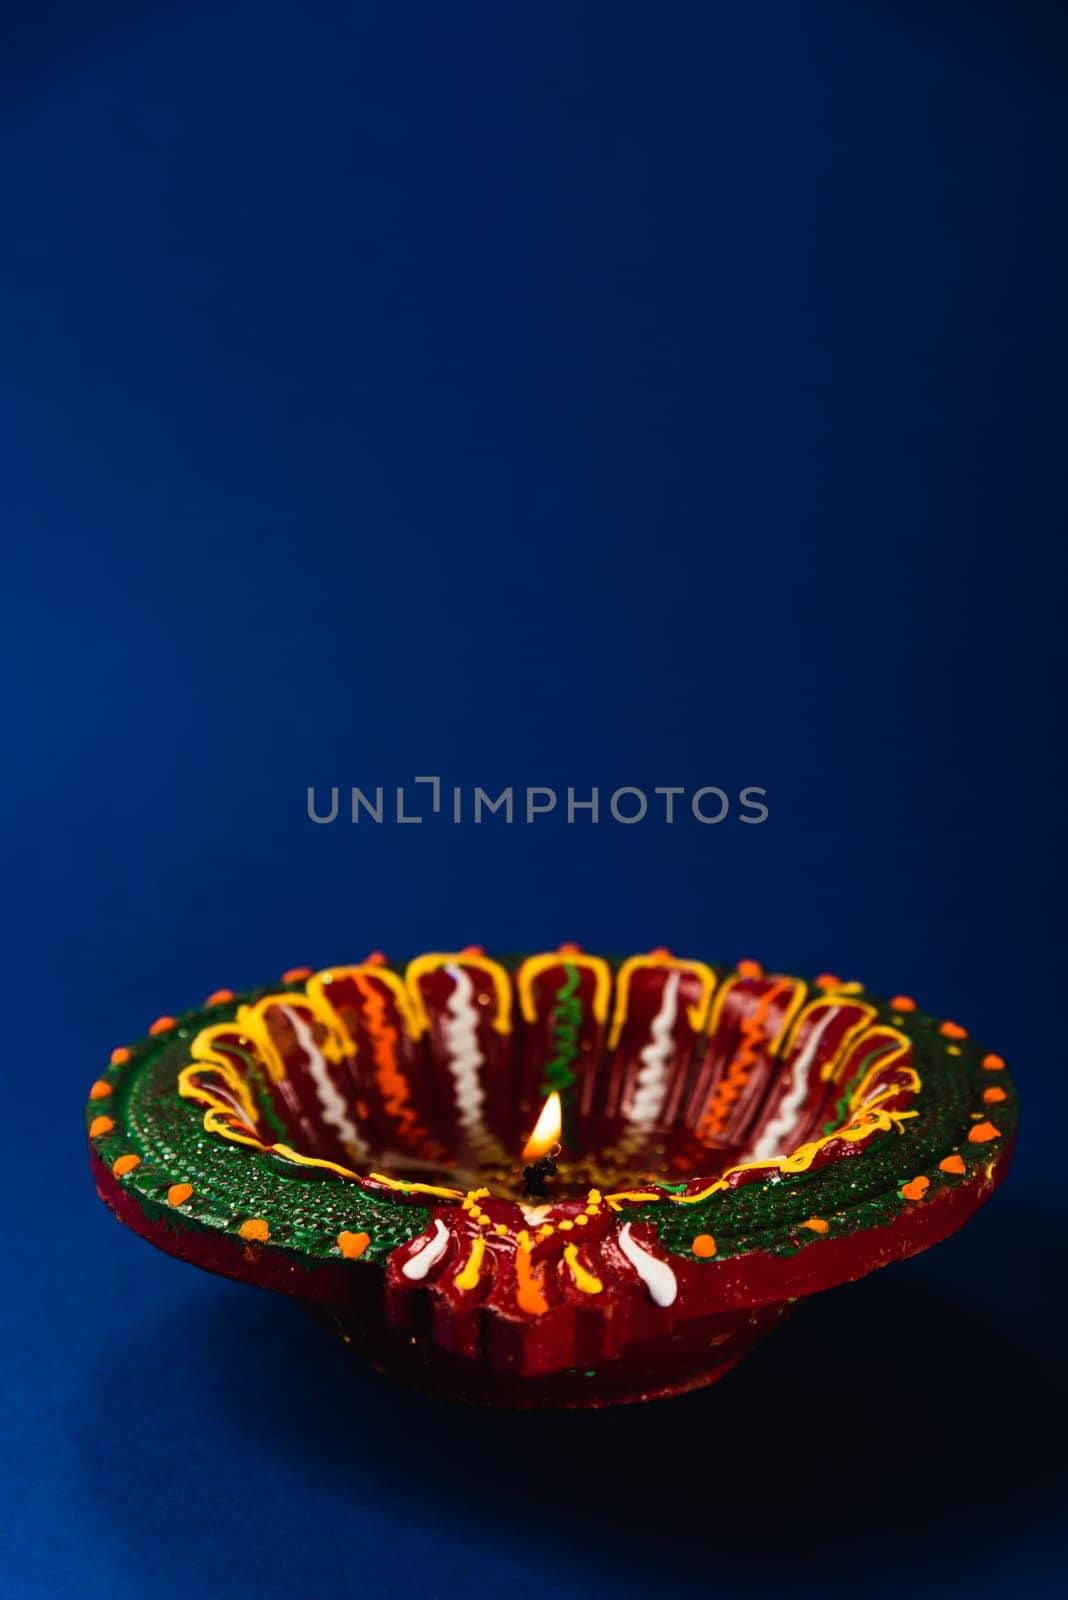 Diwali joy captured in the glow of colorful clay diya lamps, signifying prosperity and happiness, by Sorapop